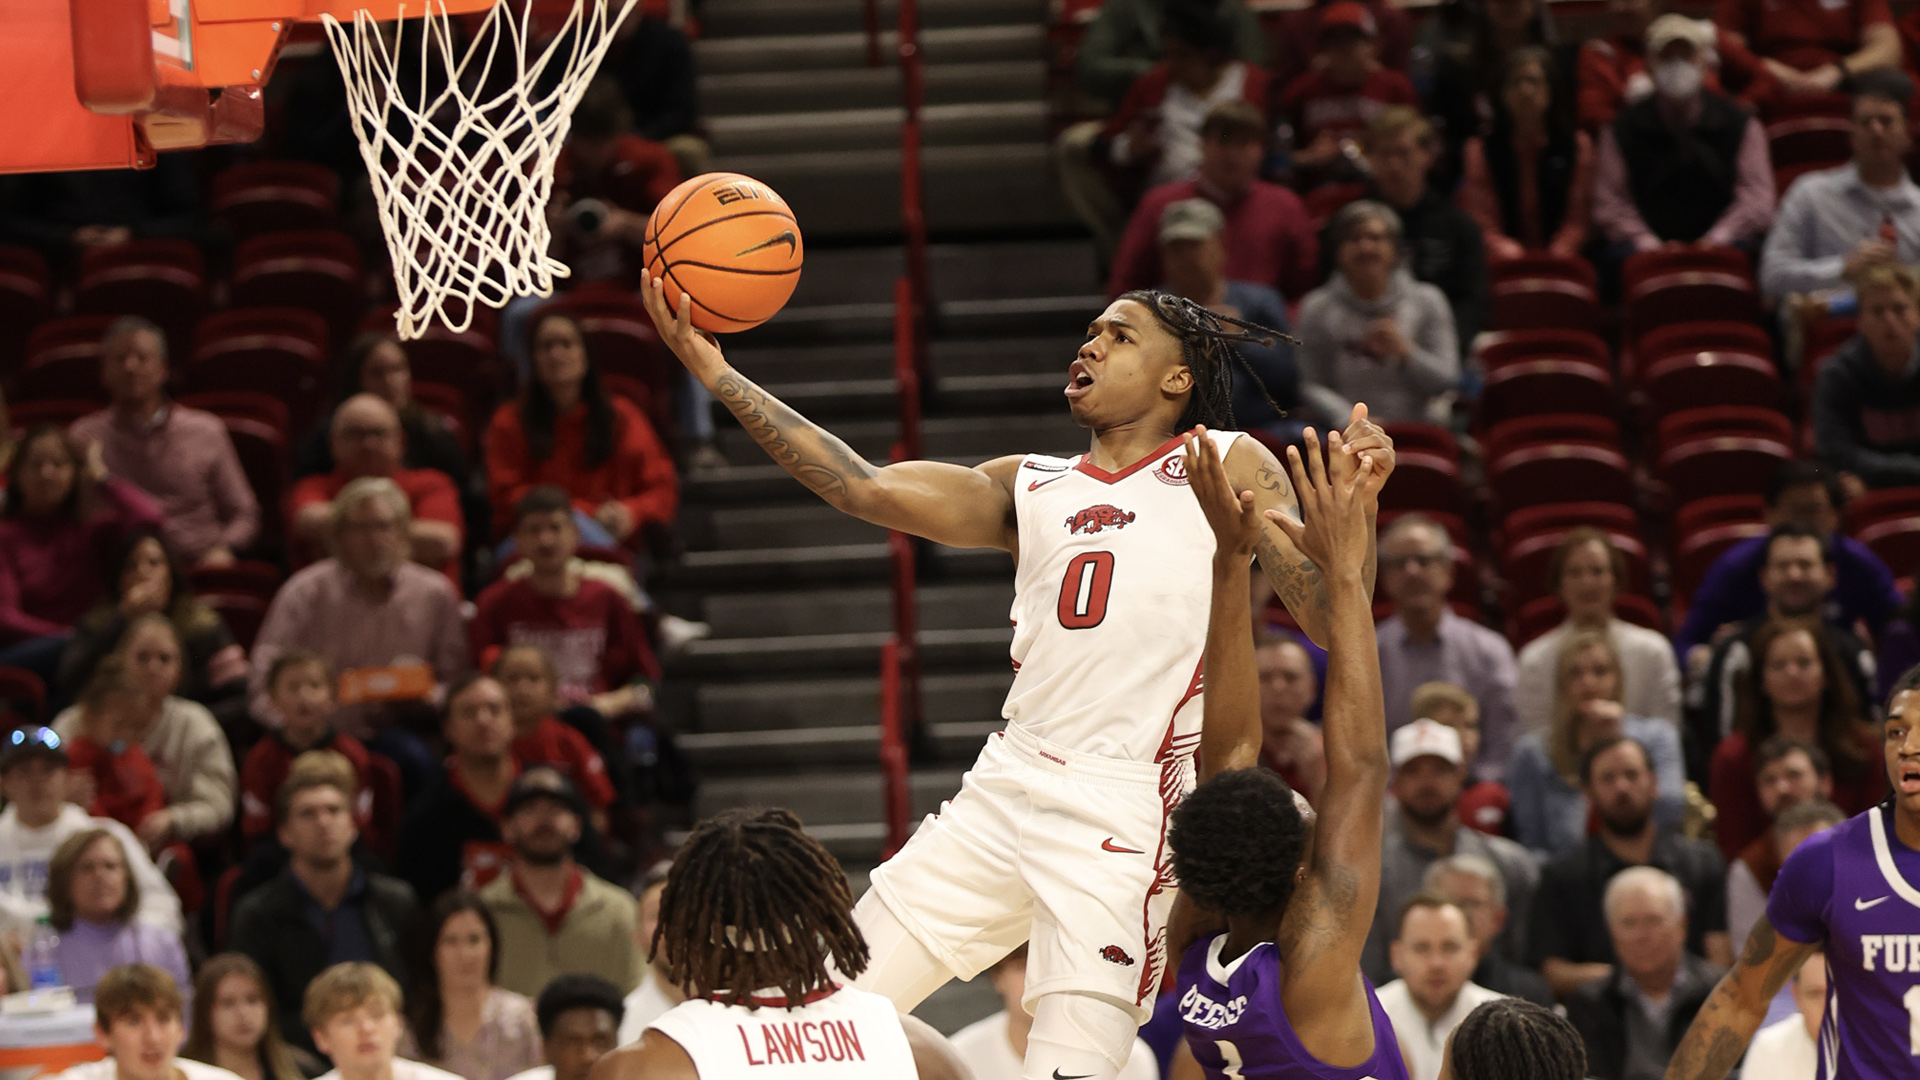 Strong Second Half Gives Arkansas 97-83 Vicotry over Furman